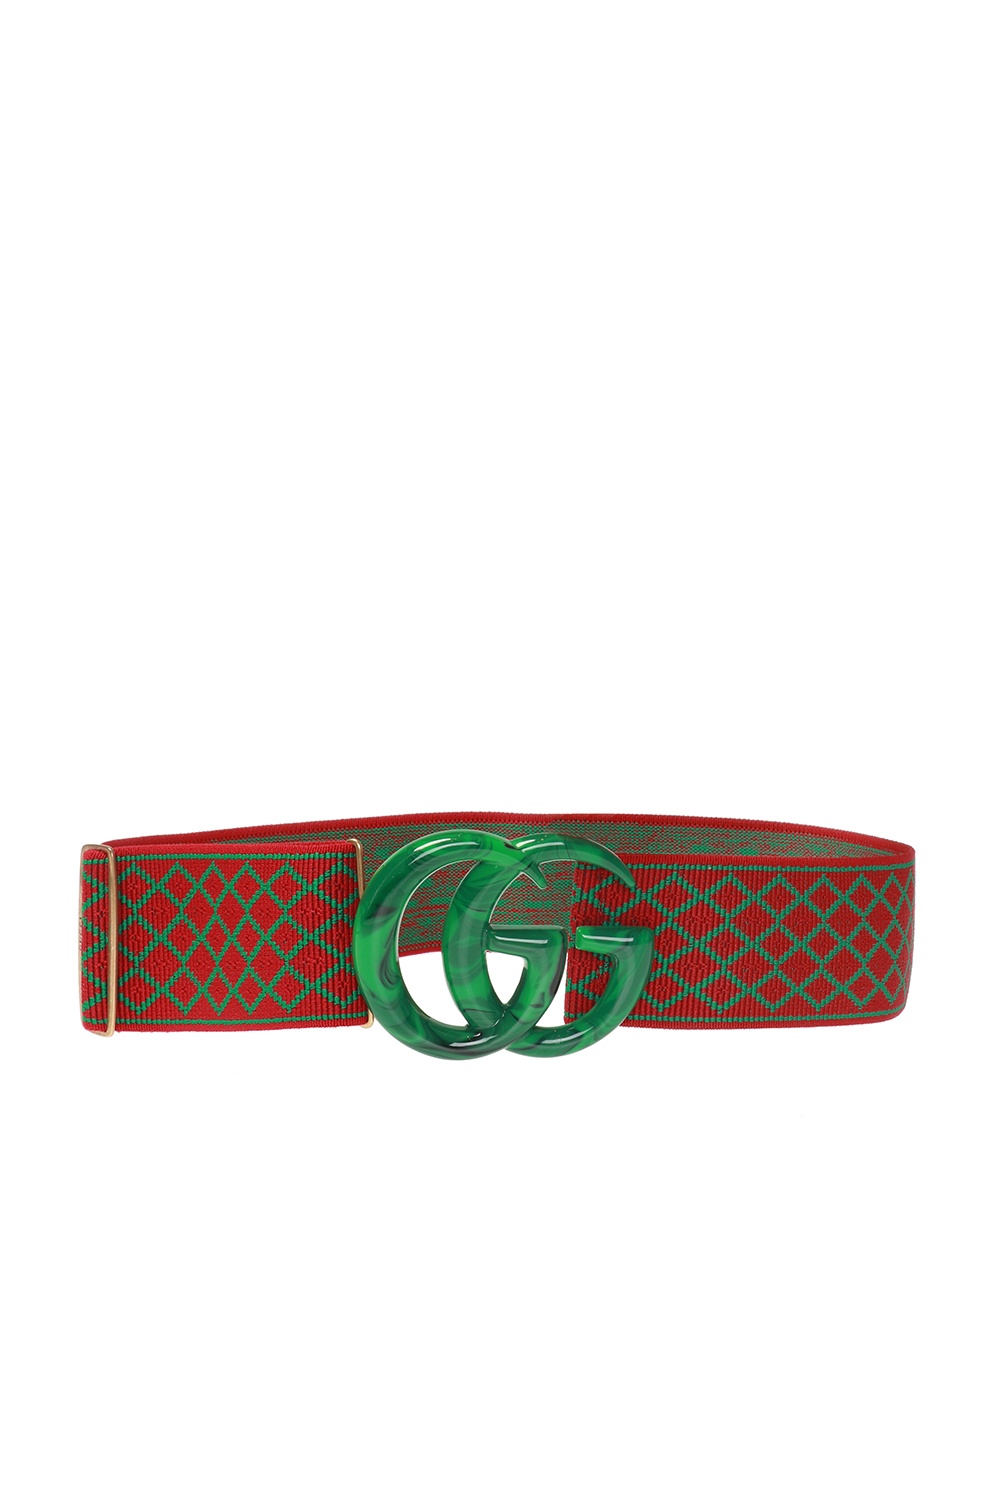 Gucci Belt with a decorative buckle, Women's Accessories